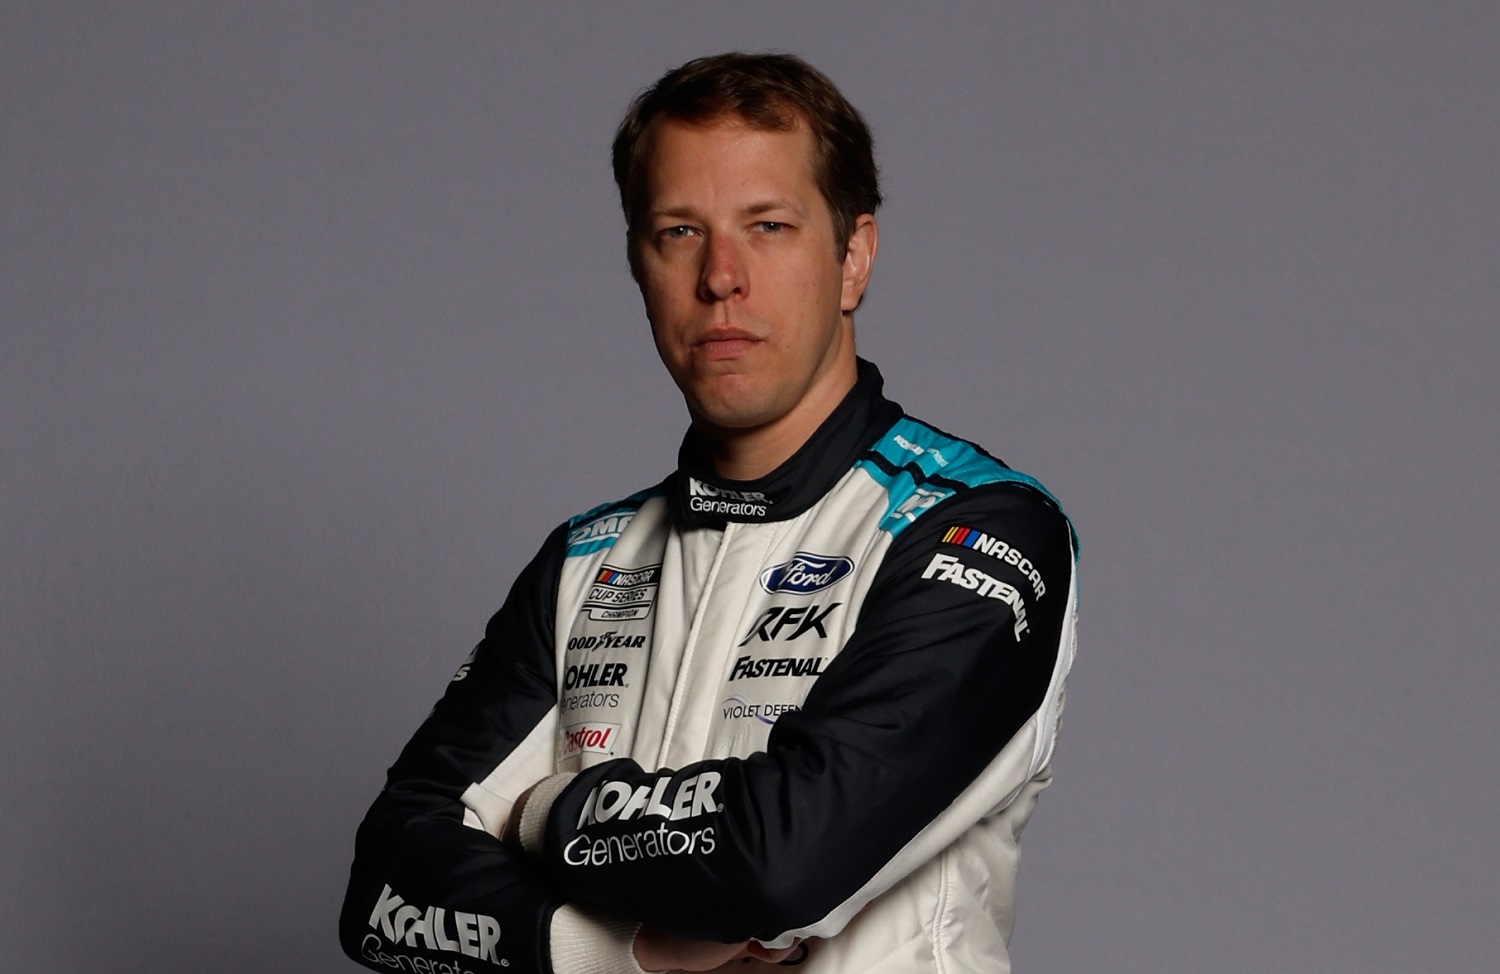 Brad Keselowski Has Made a Bold Move by Hiring the Bill James of Auto Racing for Roush Fenway